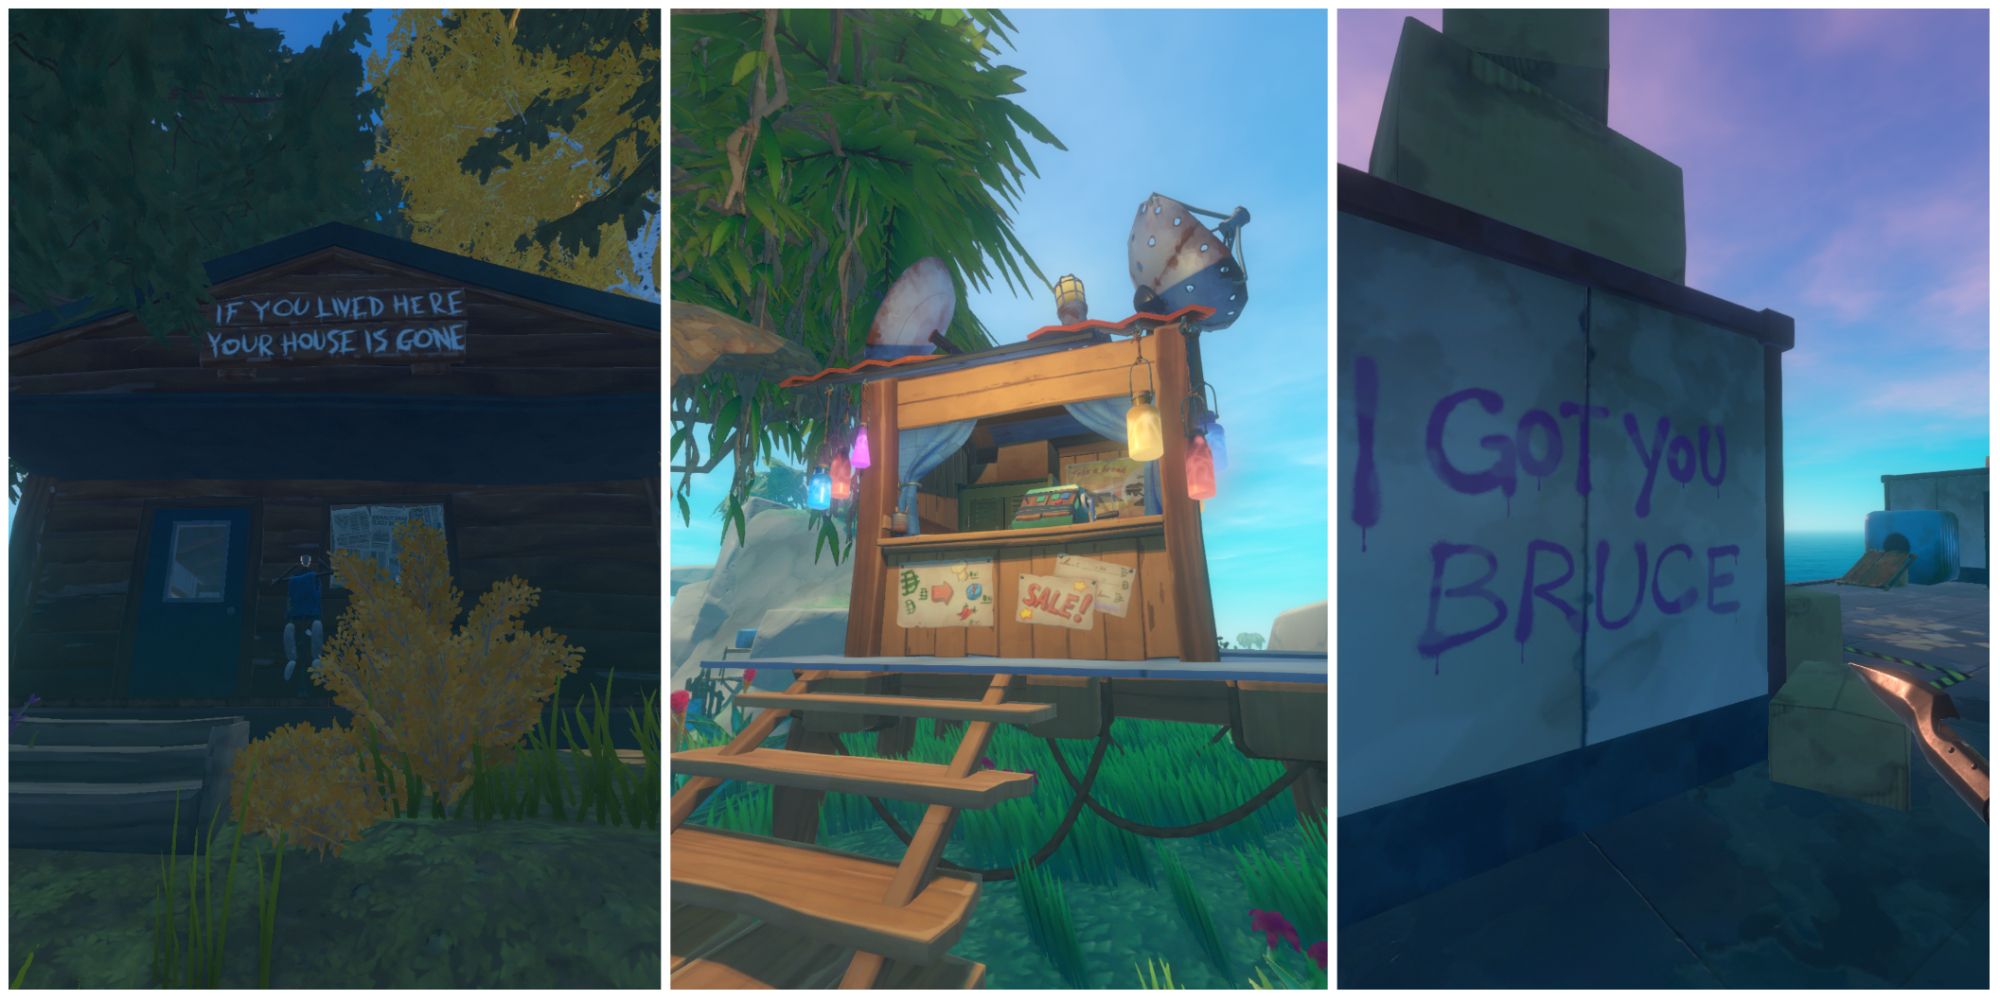 A Cabin In The Woods, A Trading Post, And Some Graffiti